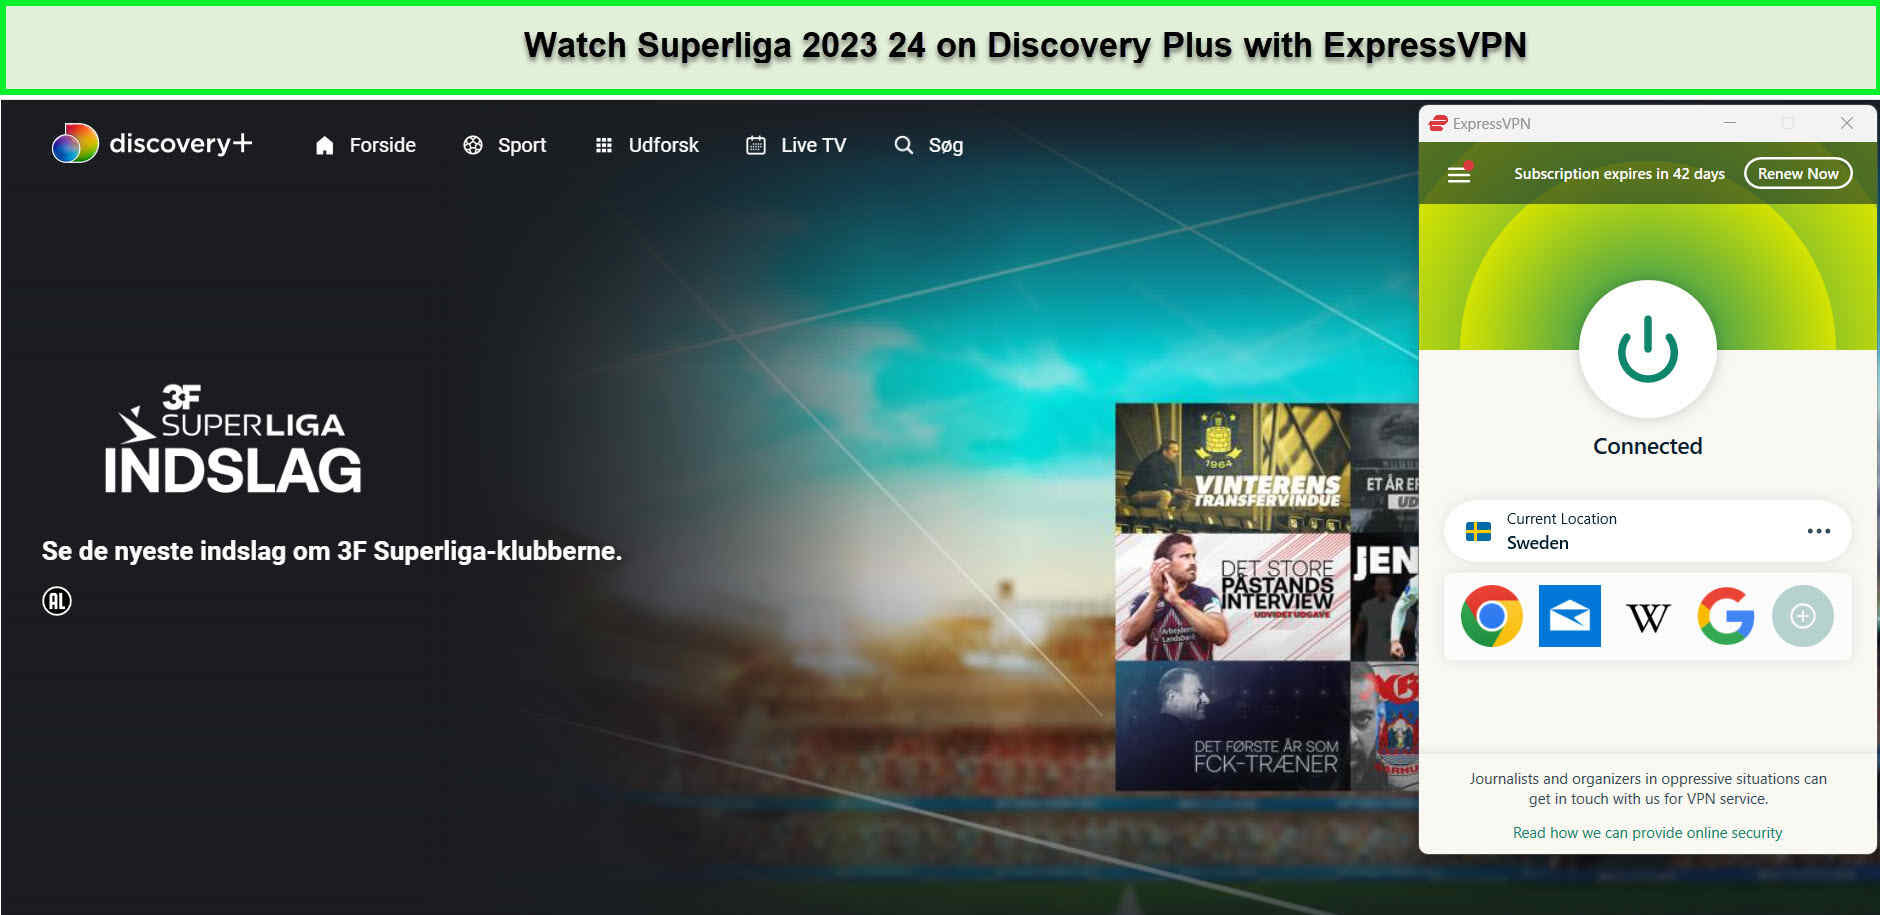 Watch-Superliga-2023-24-in-Italy-on-Discovery-Plus-with-ExpressVPN!